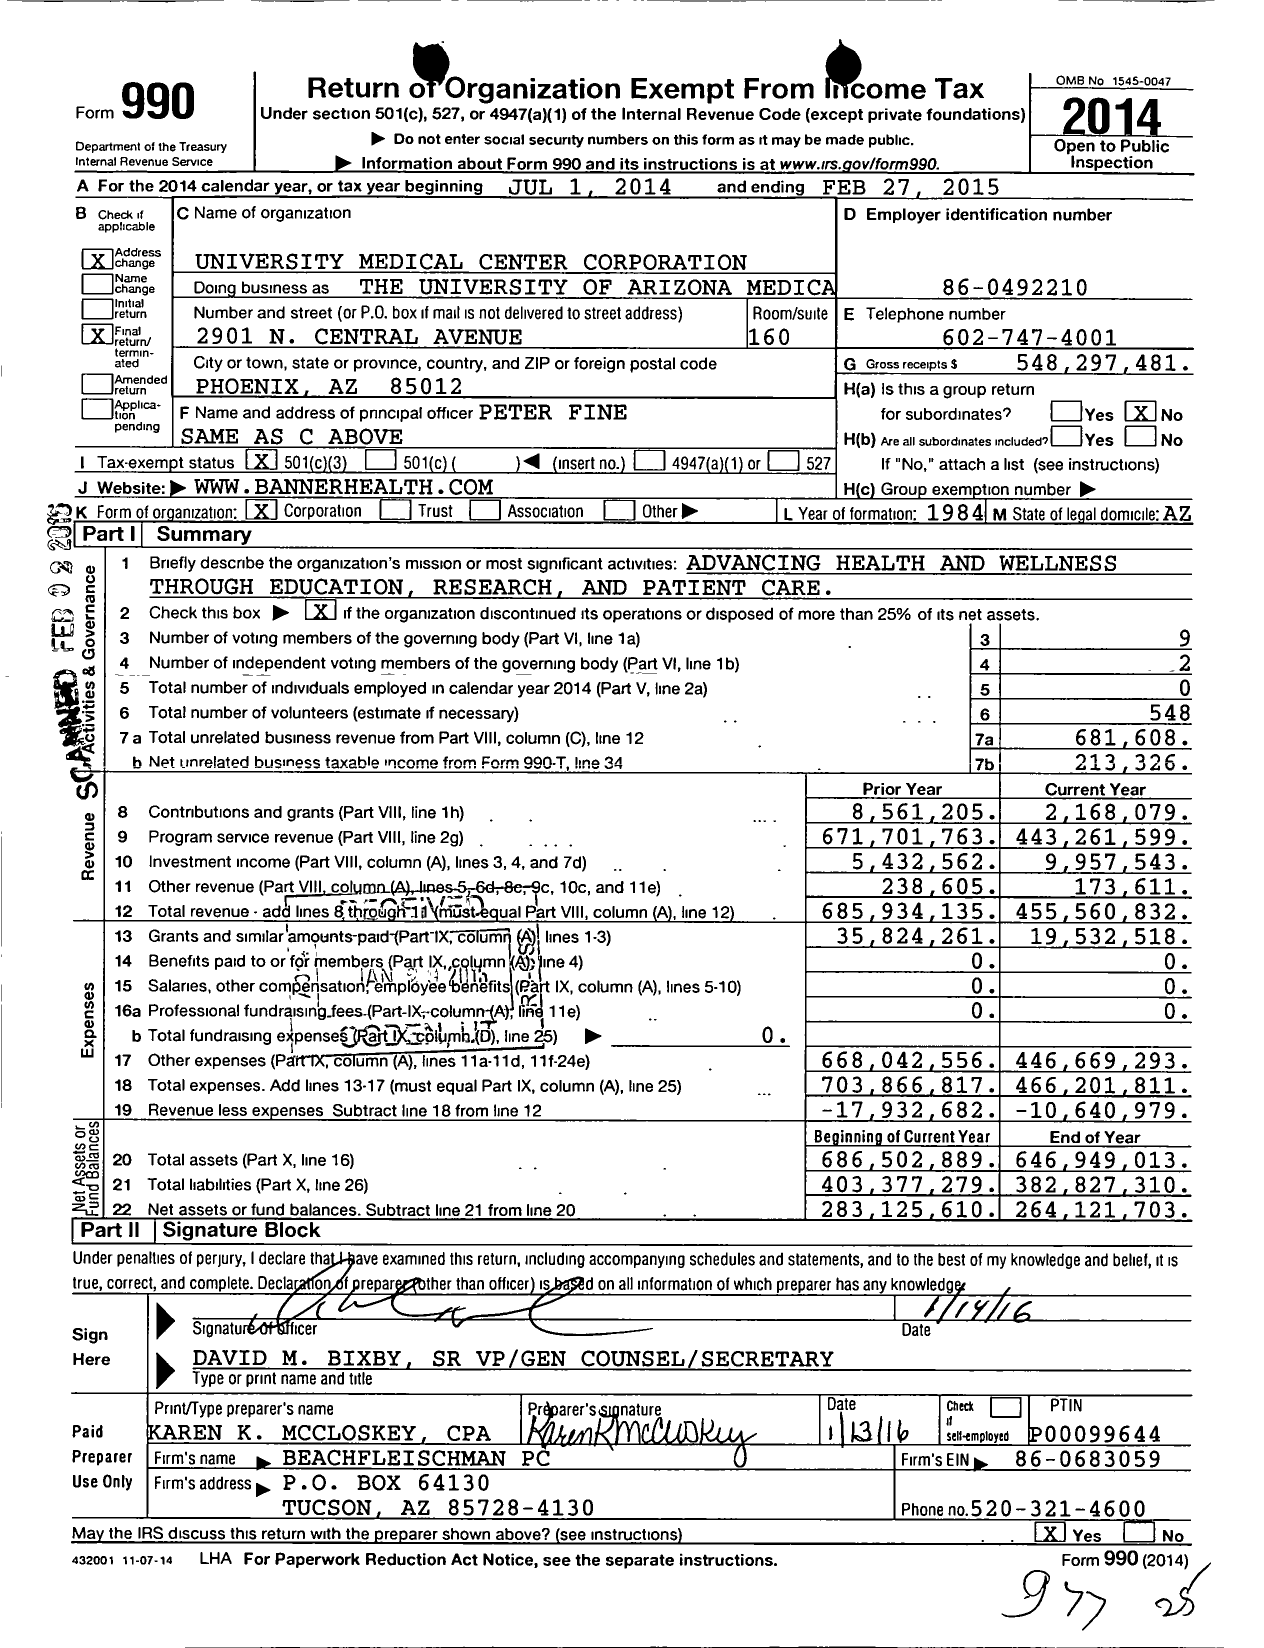 Image of first page of 2014 Form 990 for University Medical Center Corporation